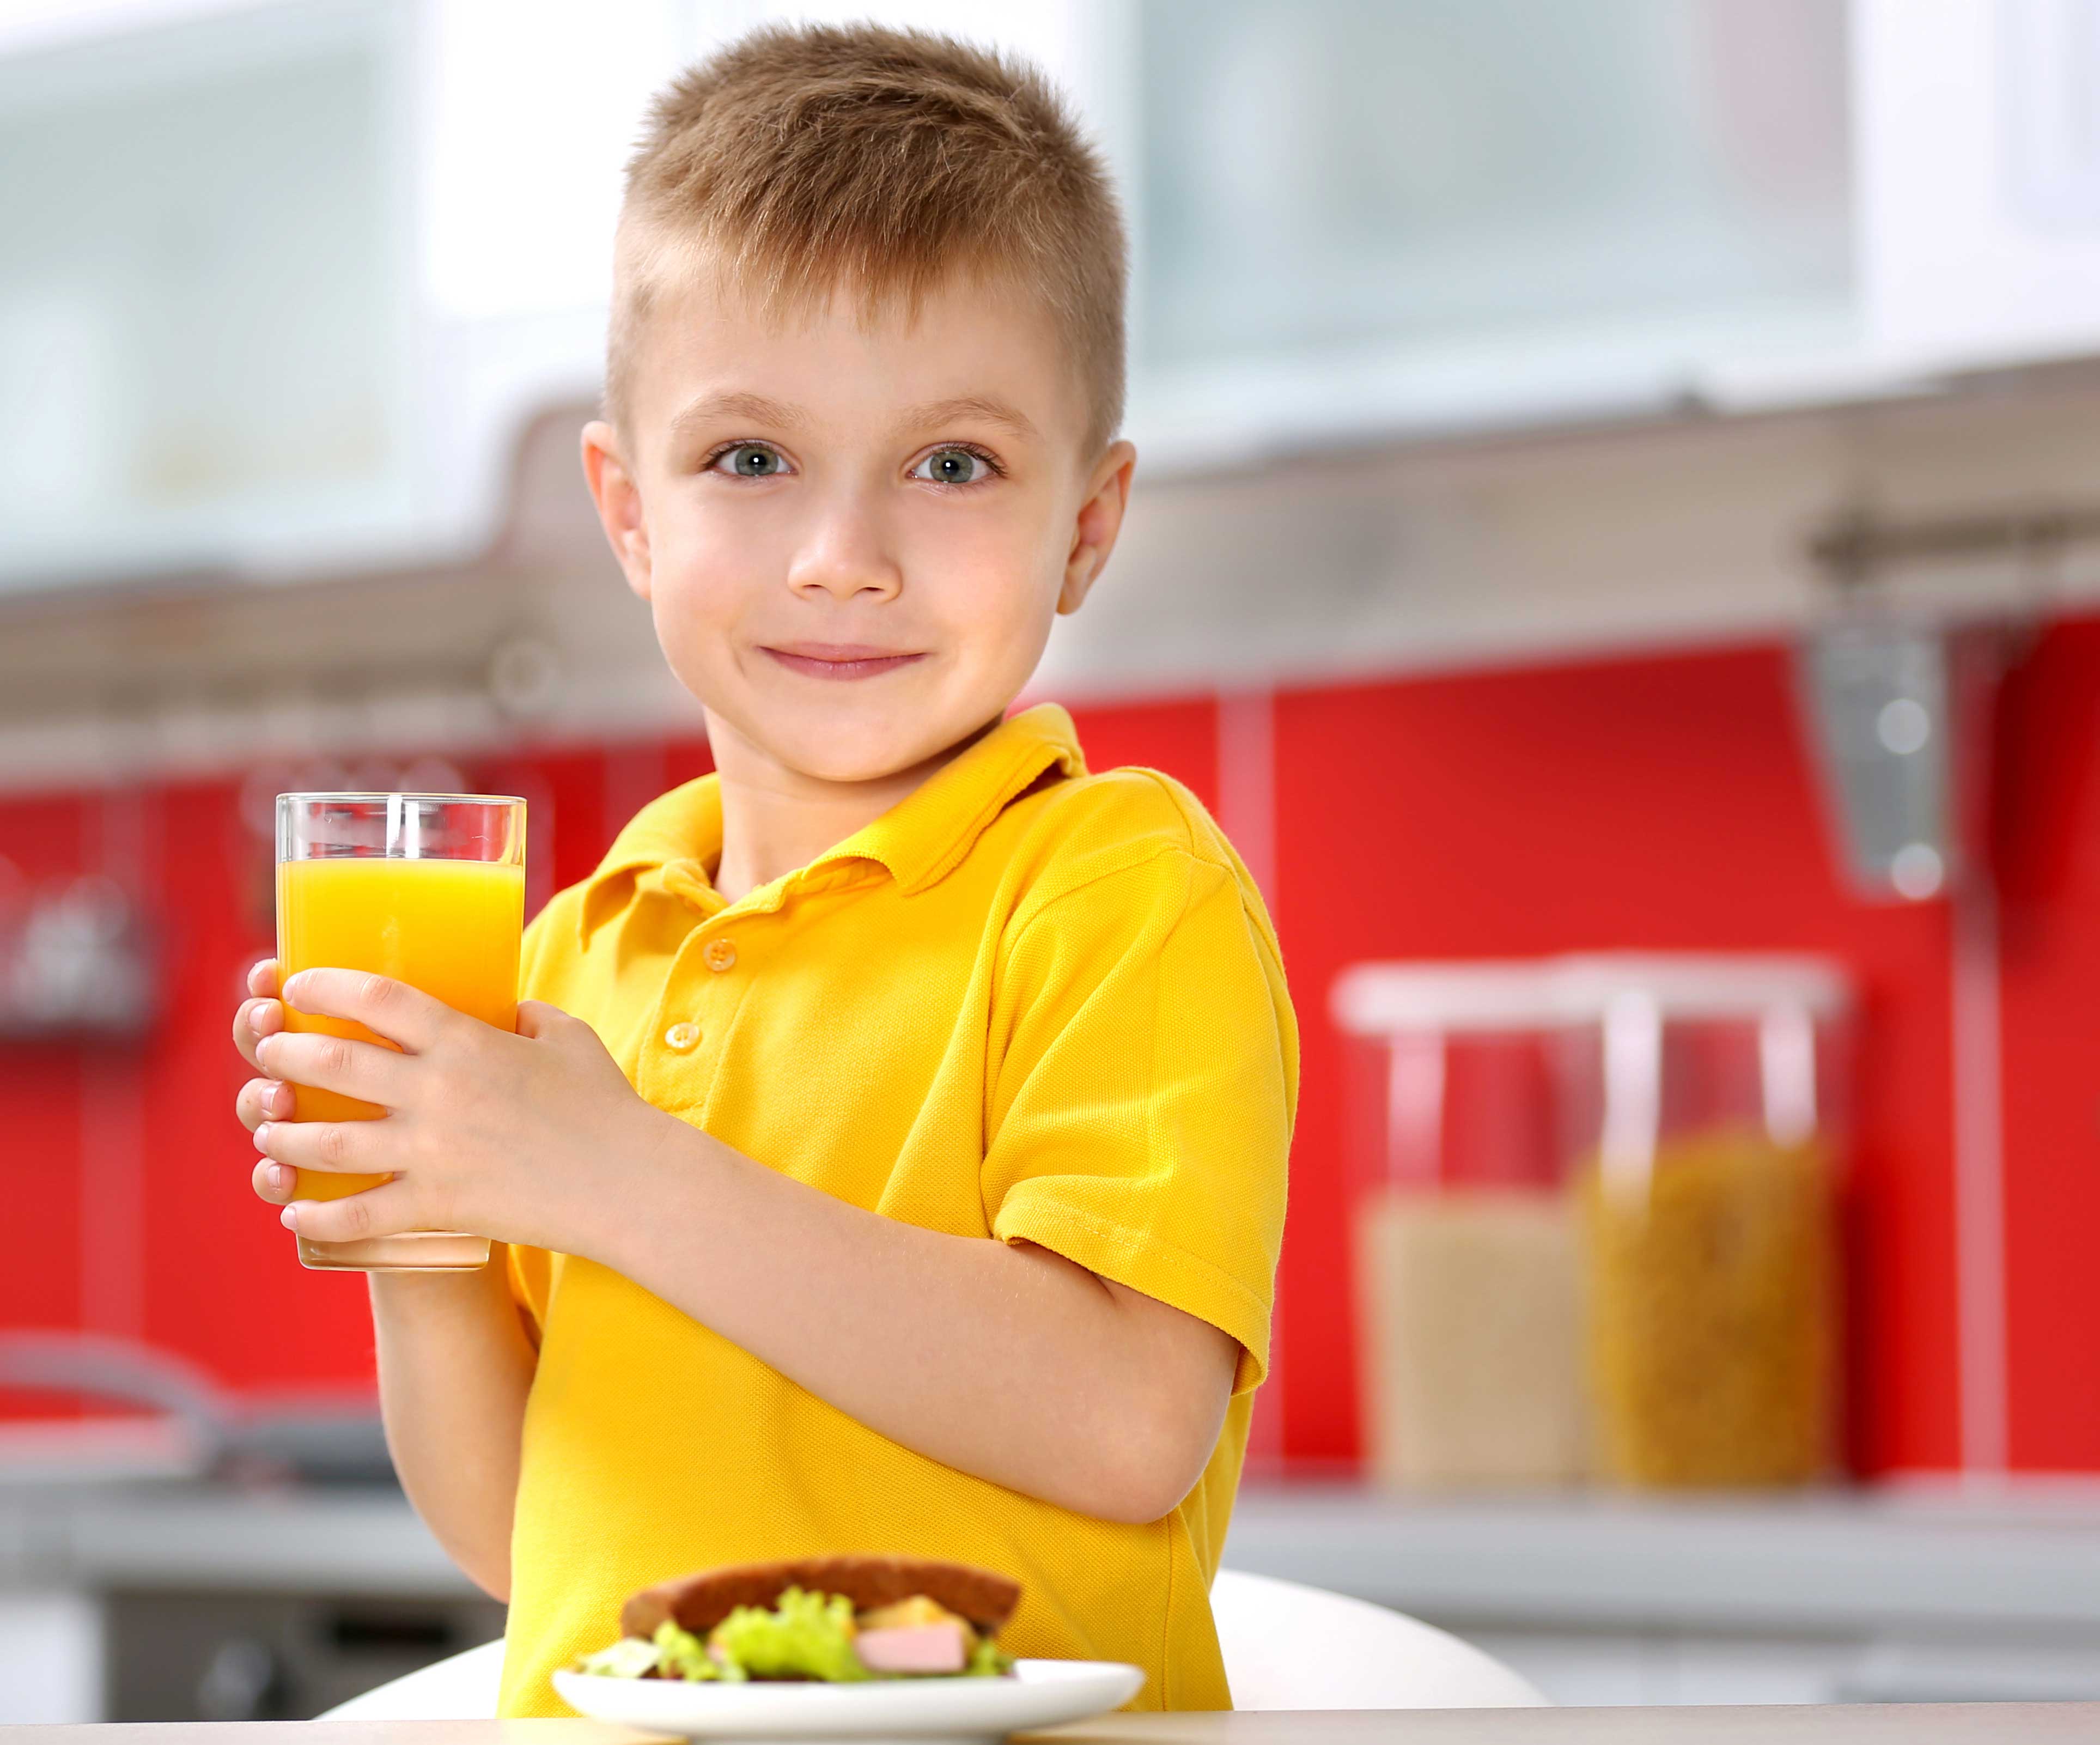 Fruit Juice: Why I Don't Give My Kids Juice and Why You Shouldn't Too 